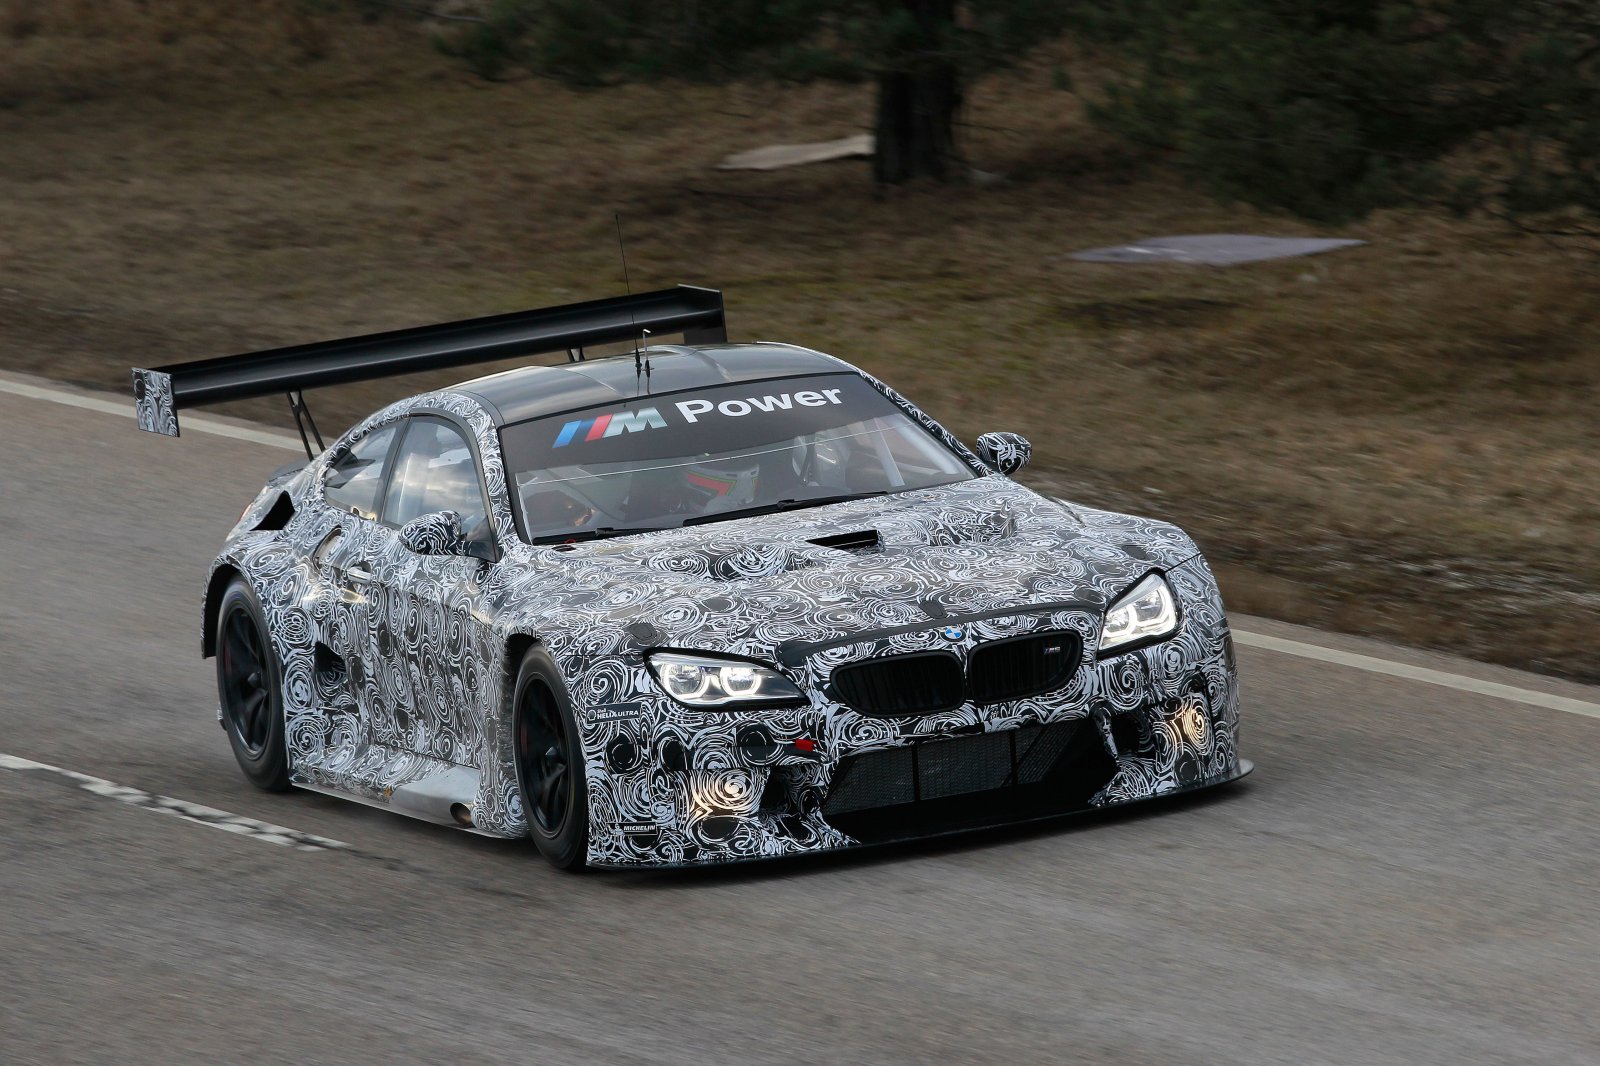 Roll-out for the new BMW M6 GT3